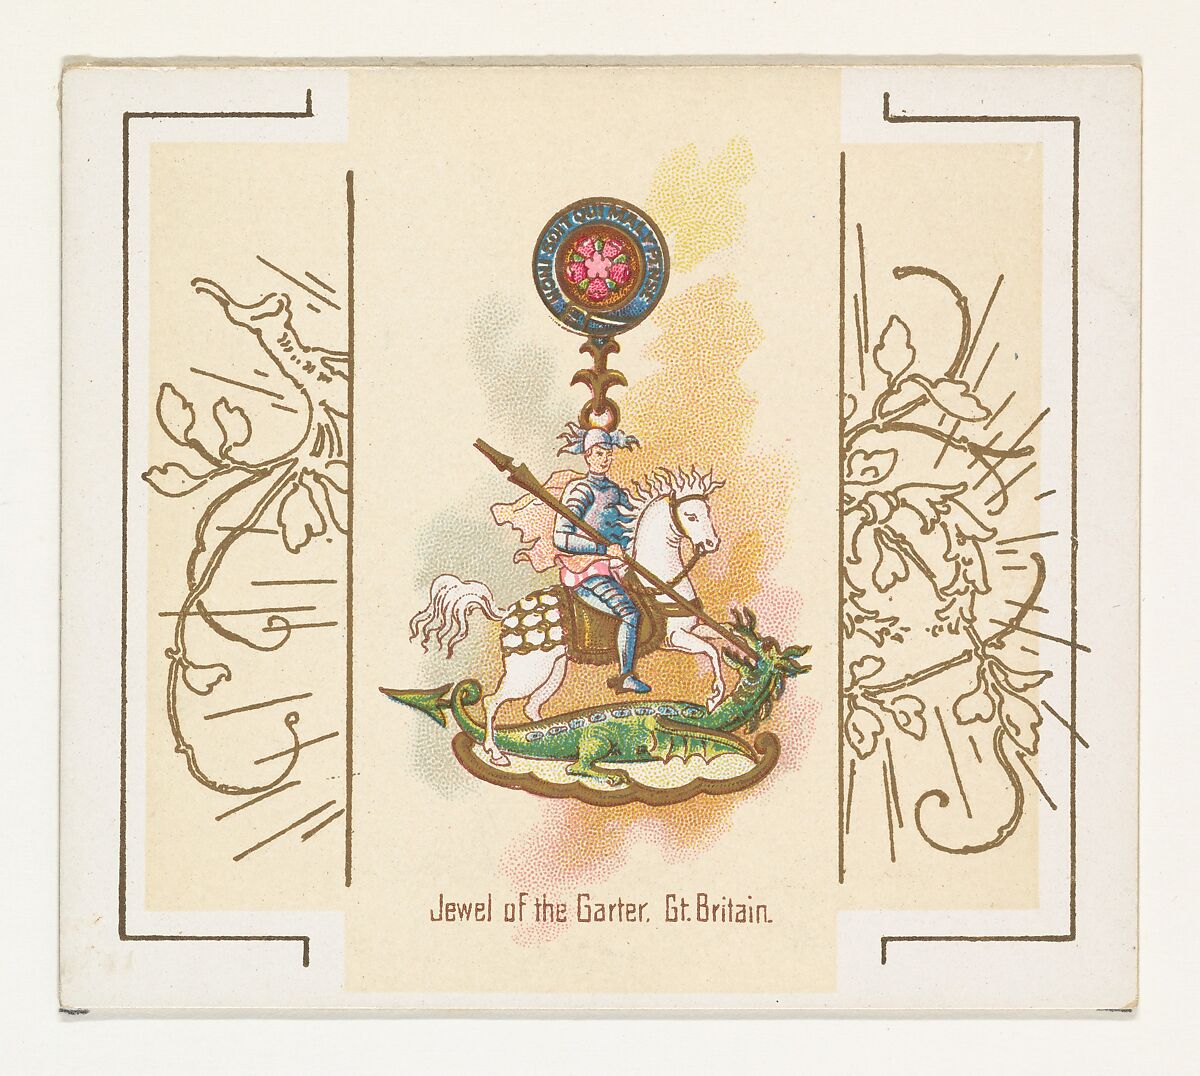 Jewel of the Garter, Great Britain, from the World's Decorations series (N44) for Allen & Ginter Cigarettes, Issued by Allen &amp; Ginter (American, Richmond, Virginia), Commercial color lithograph 